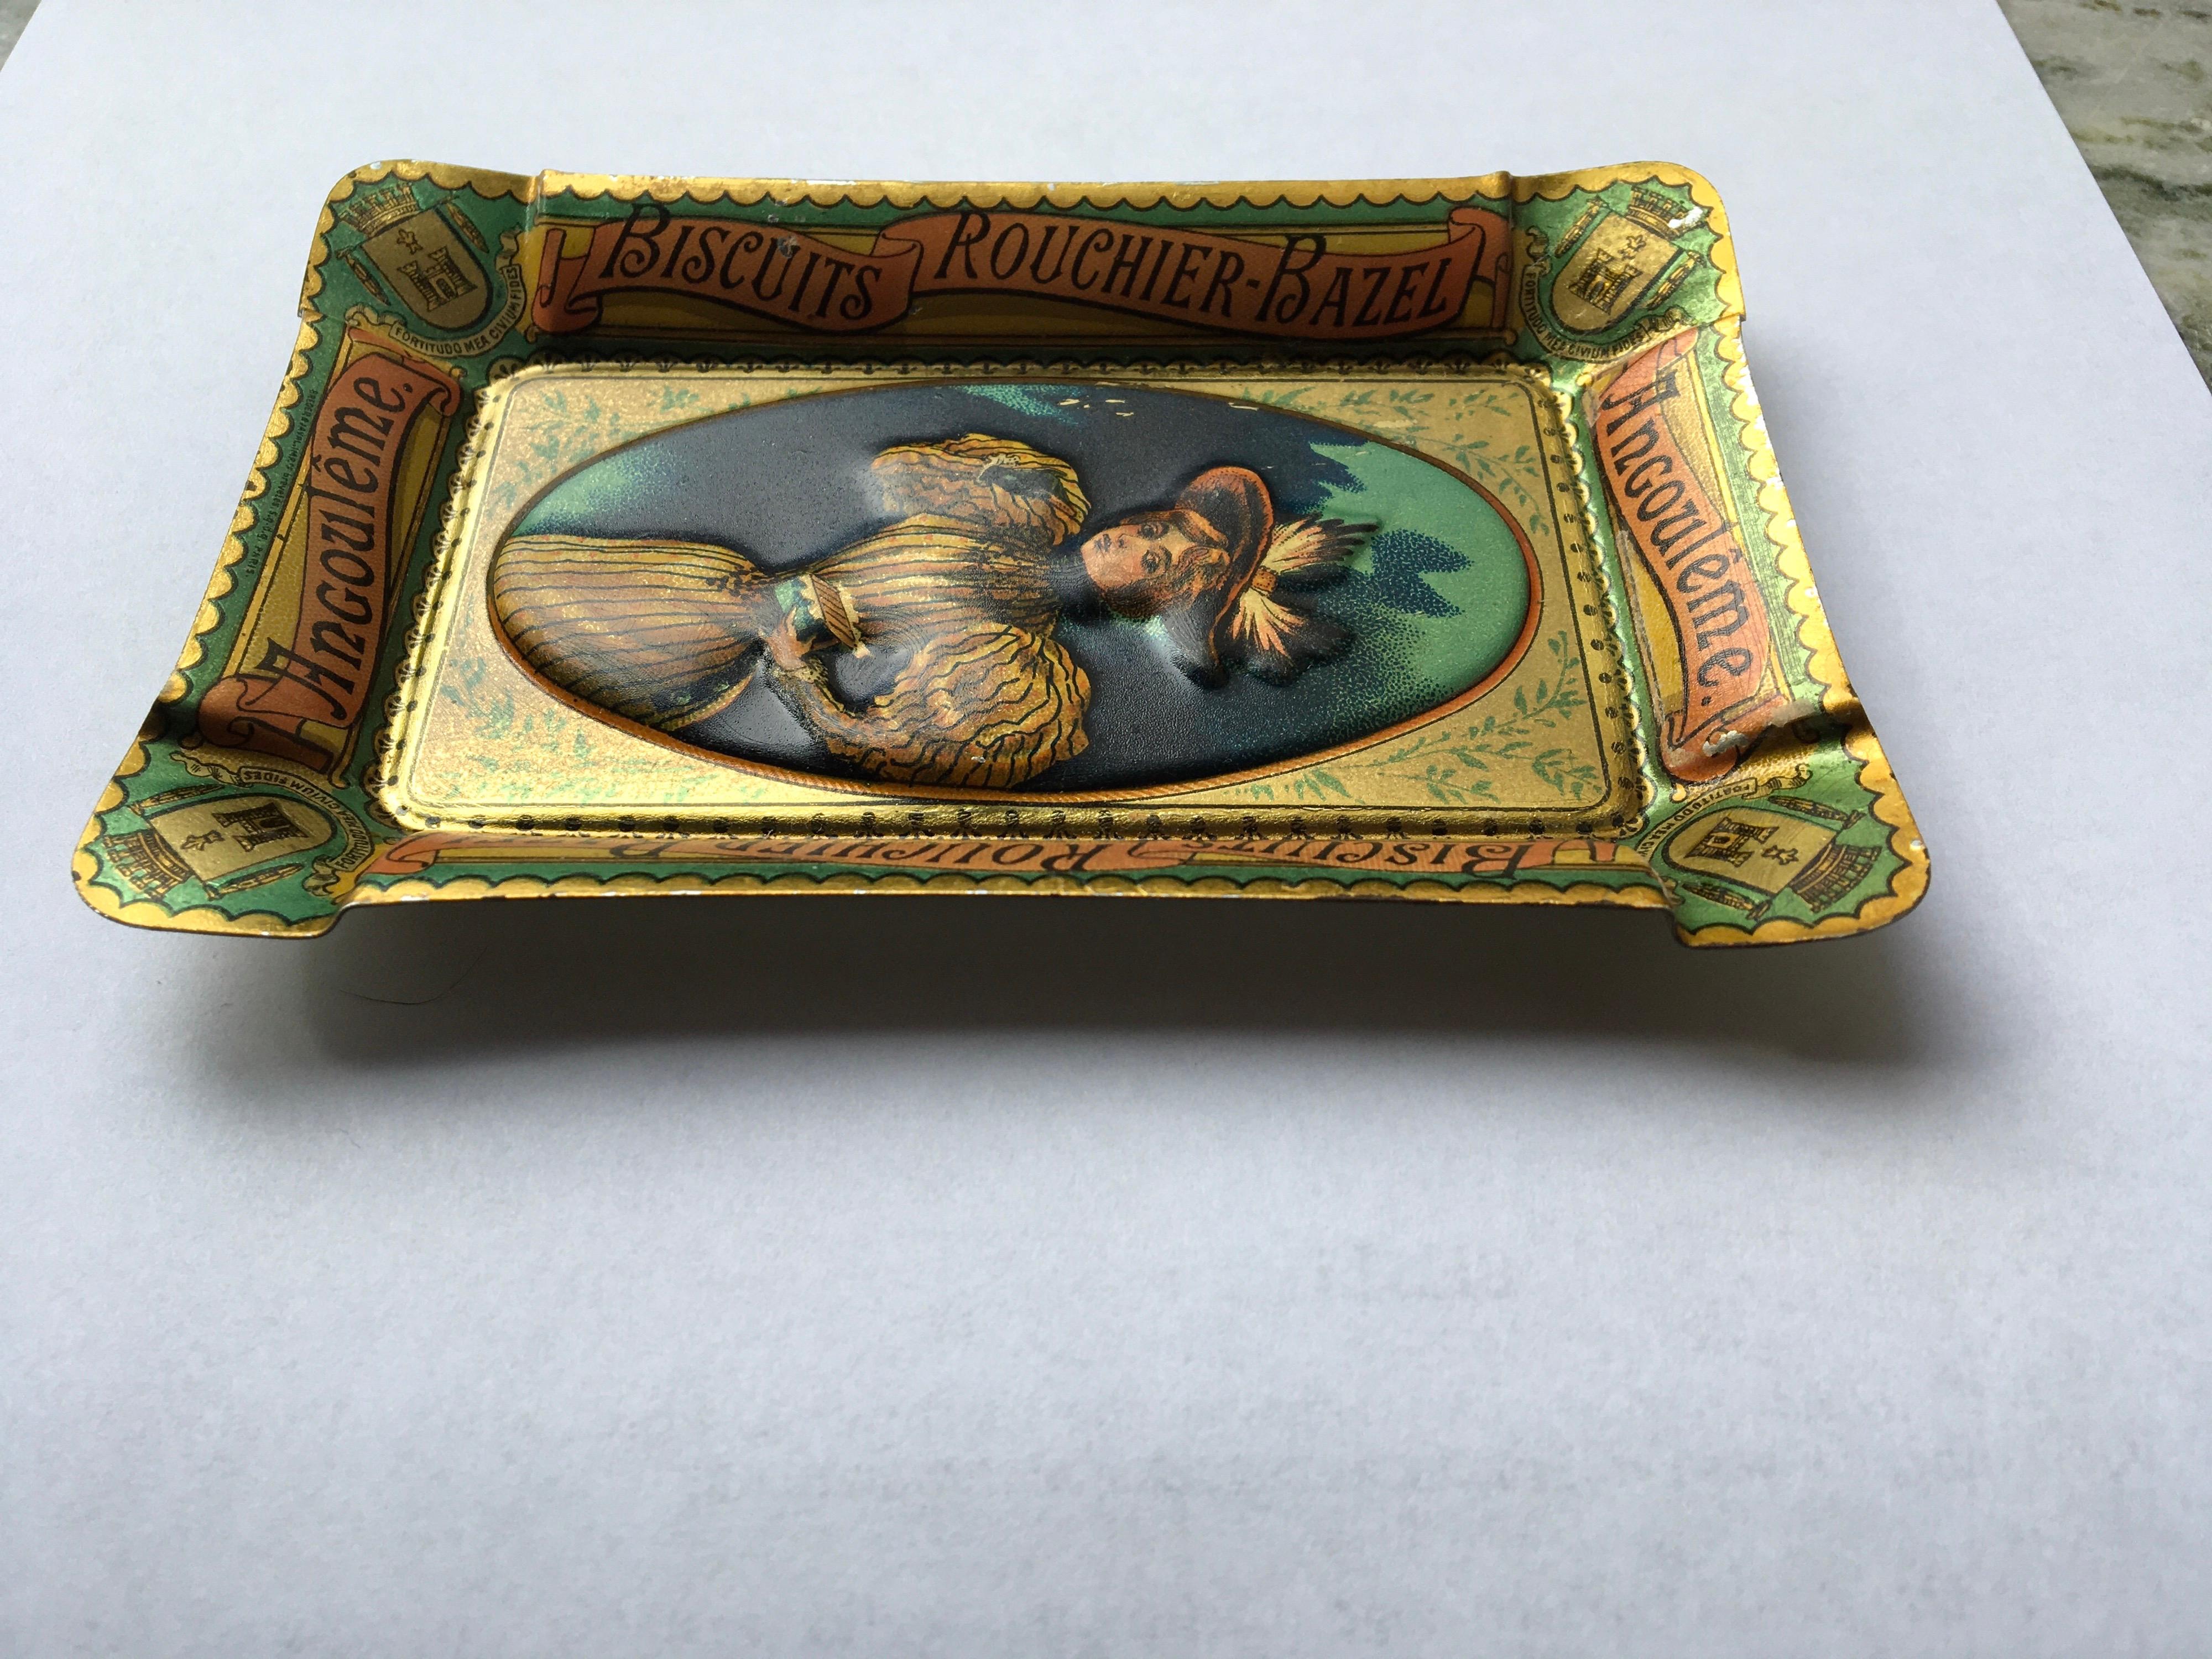 20th Century Antique Litho Tin Tray or Ashtray for Biscuits Rouchier Bazel France, circa 1900